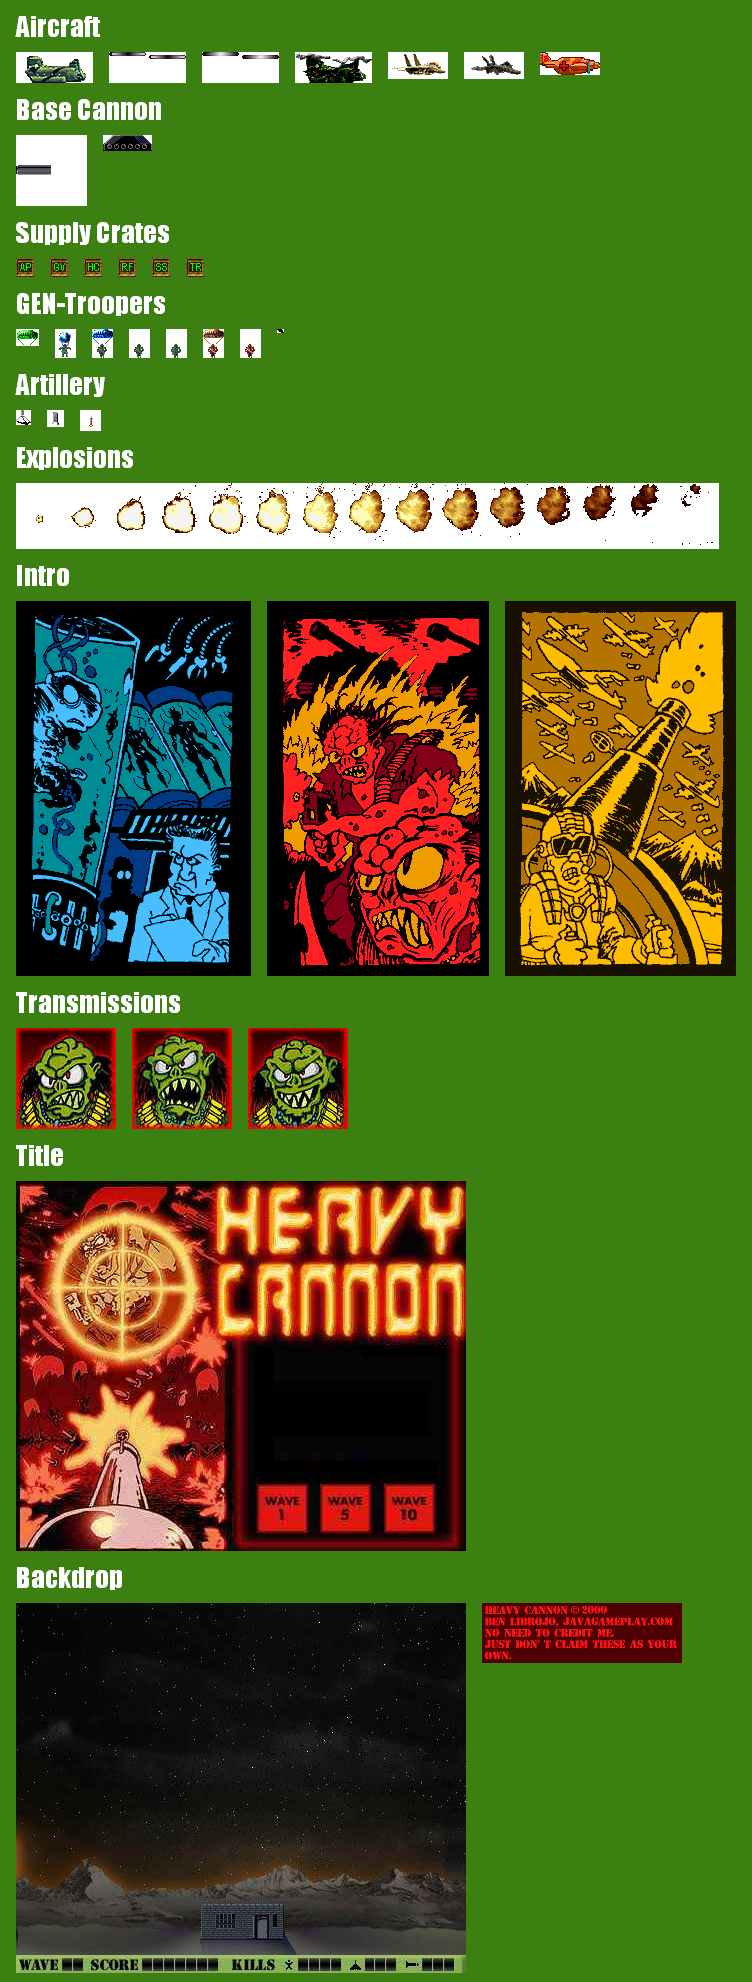 J@vaGamePlay.com Games - Heavy Cannon